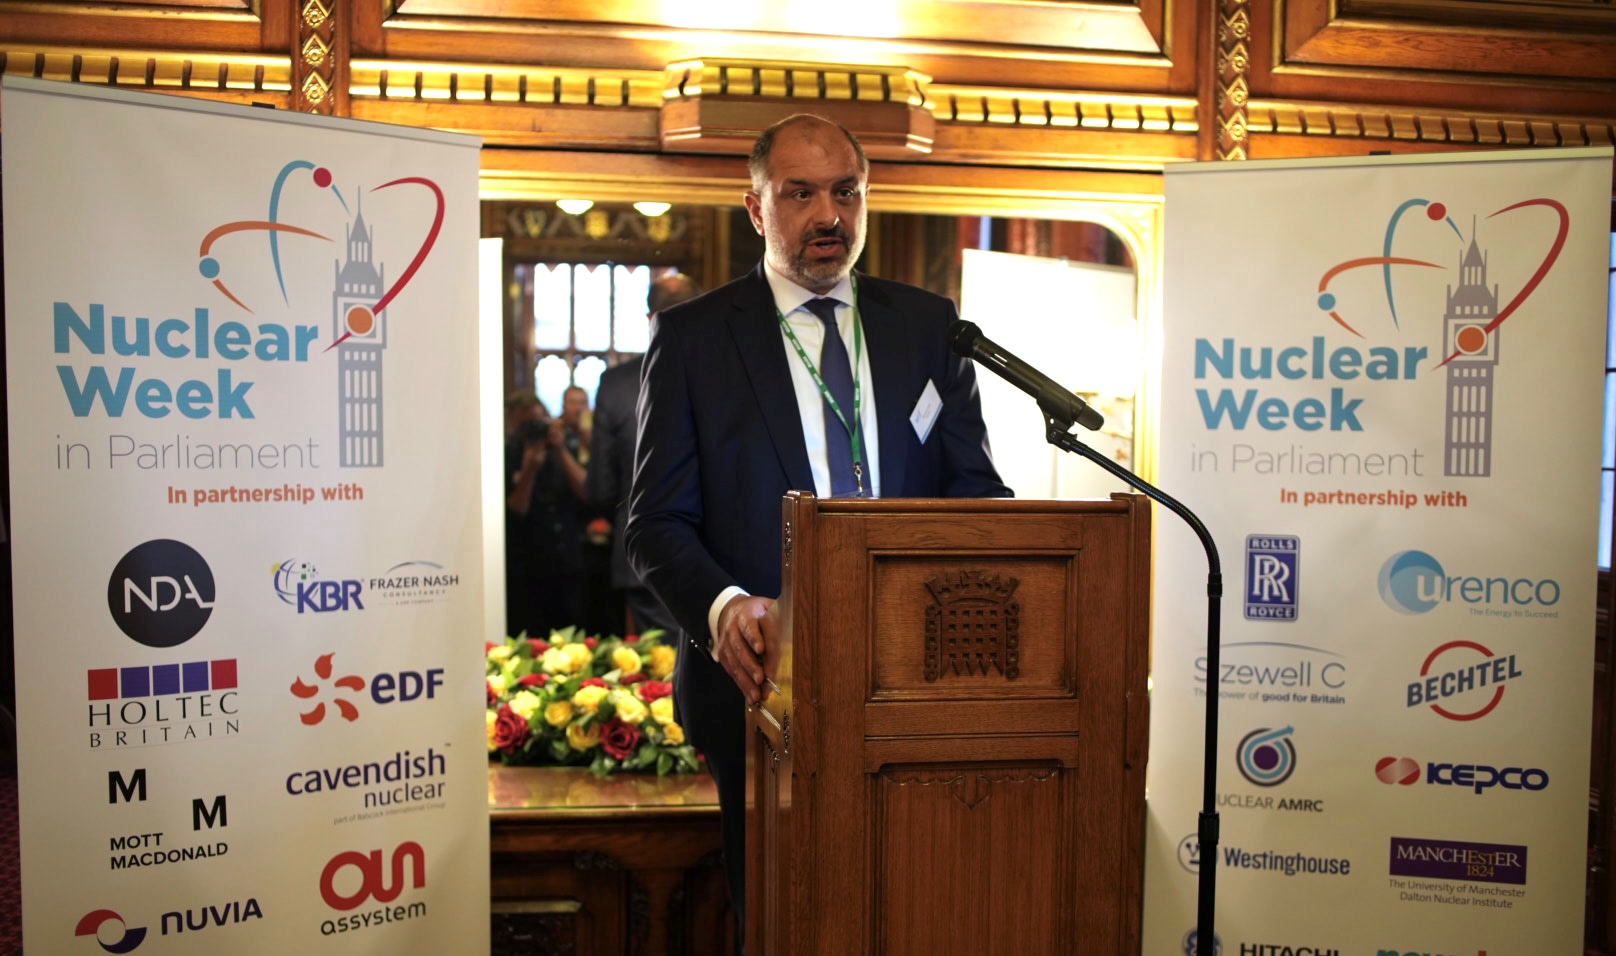 /cdn/uploads/content-images/NWIP_Laurent_-_Nuclear_Week_in_Parliament_1_crop.png